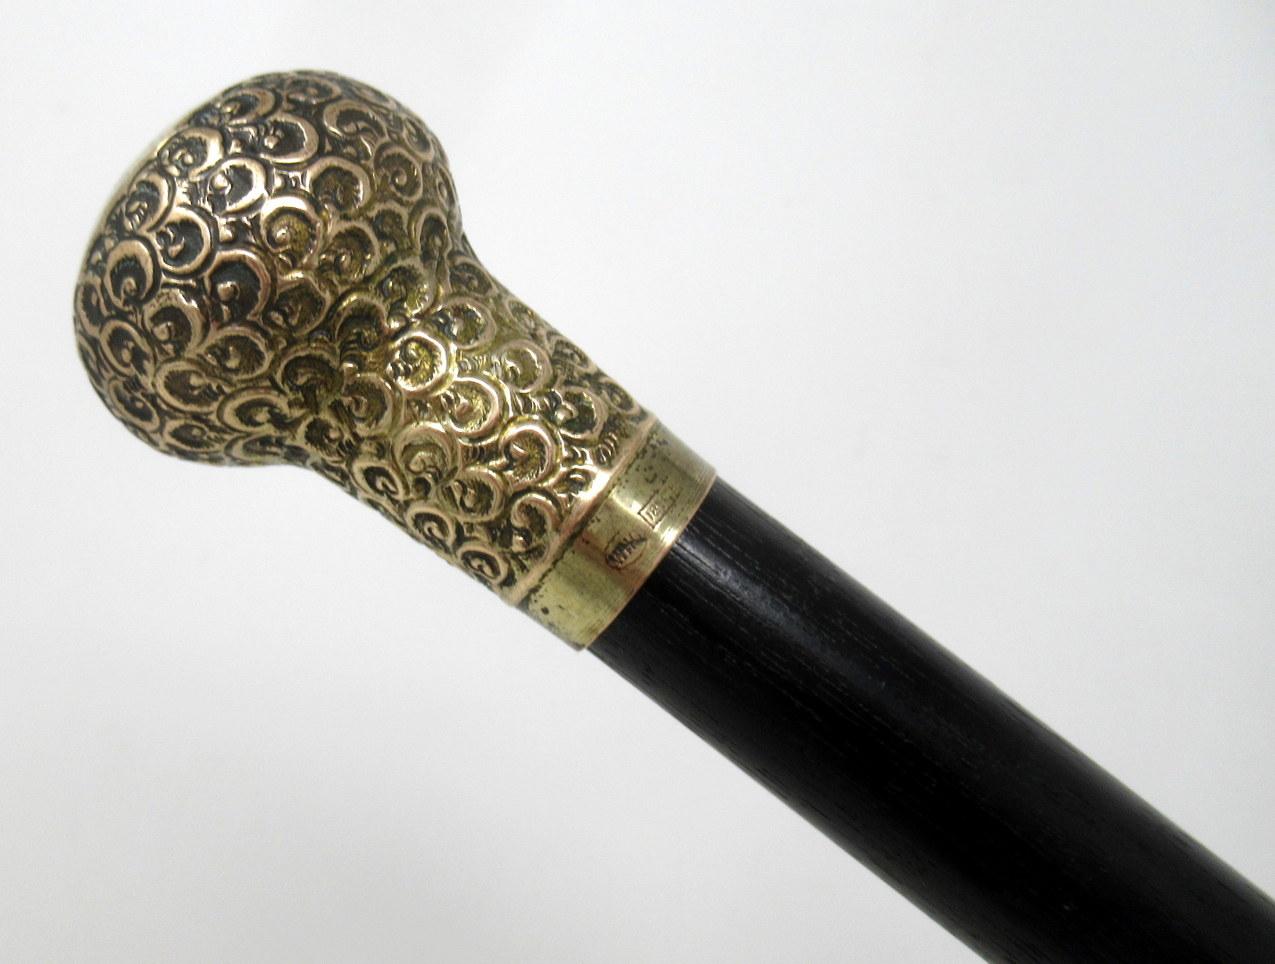 Fine quality ebonized ebony walking cane with highly decorative embossed 18-carat gold-plated on brass mount, last quarter of the 19th century.

The embossed and plain gold knopped grip above a tapering ebonized shaft with a later rubber